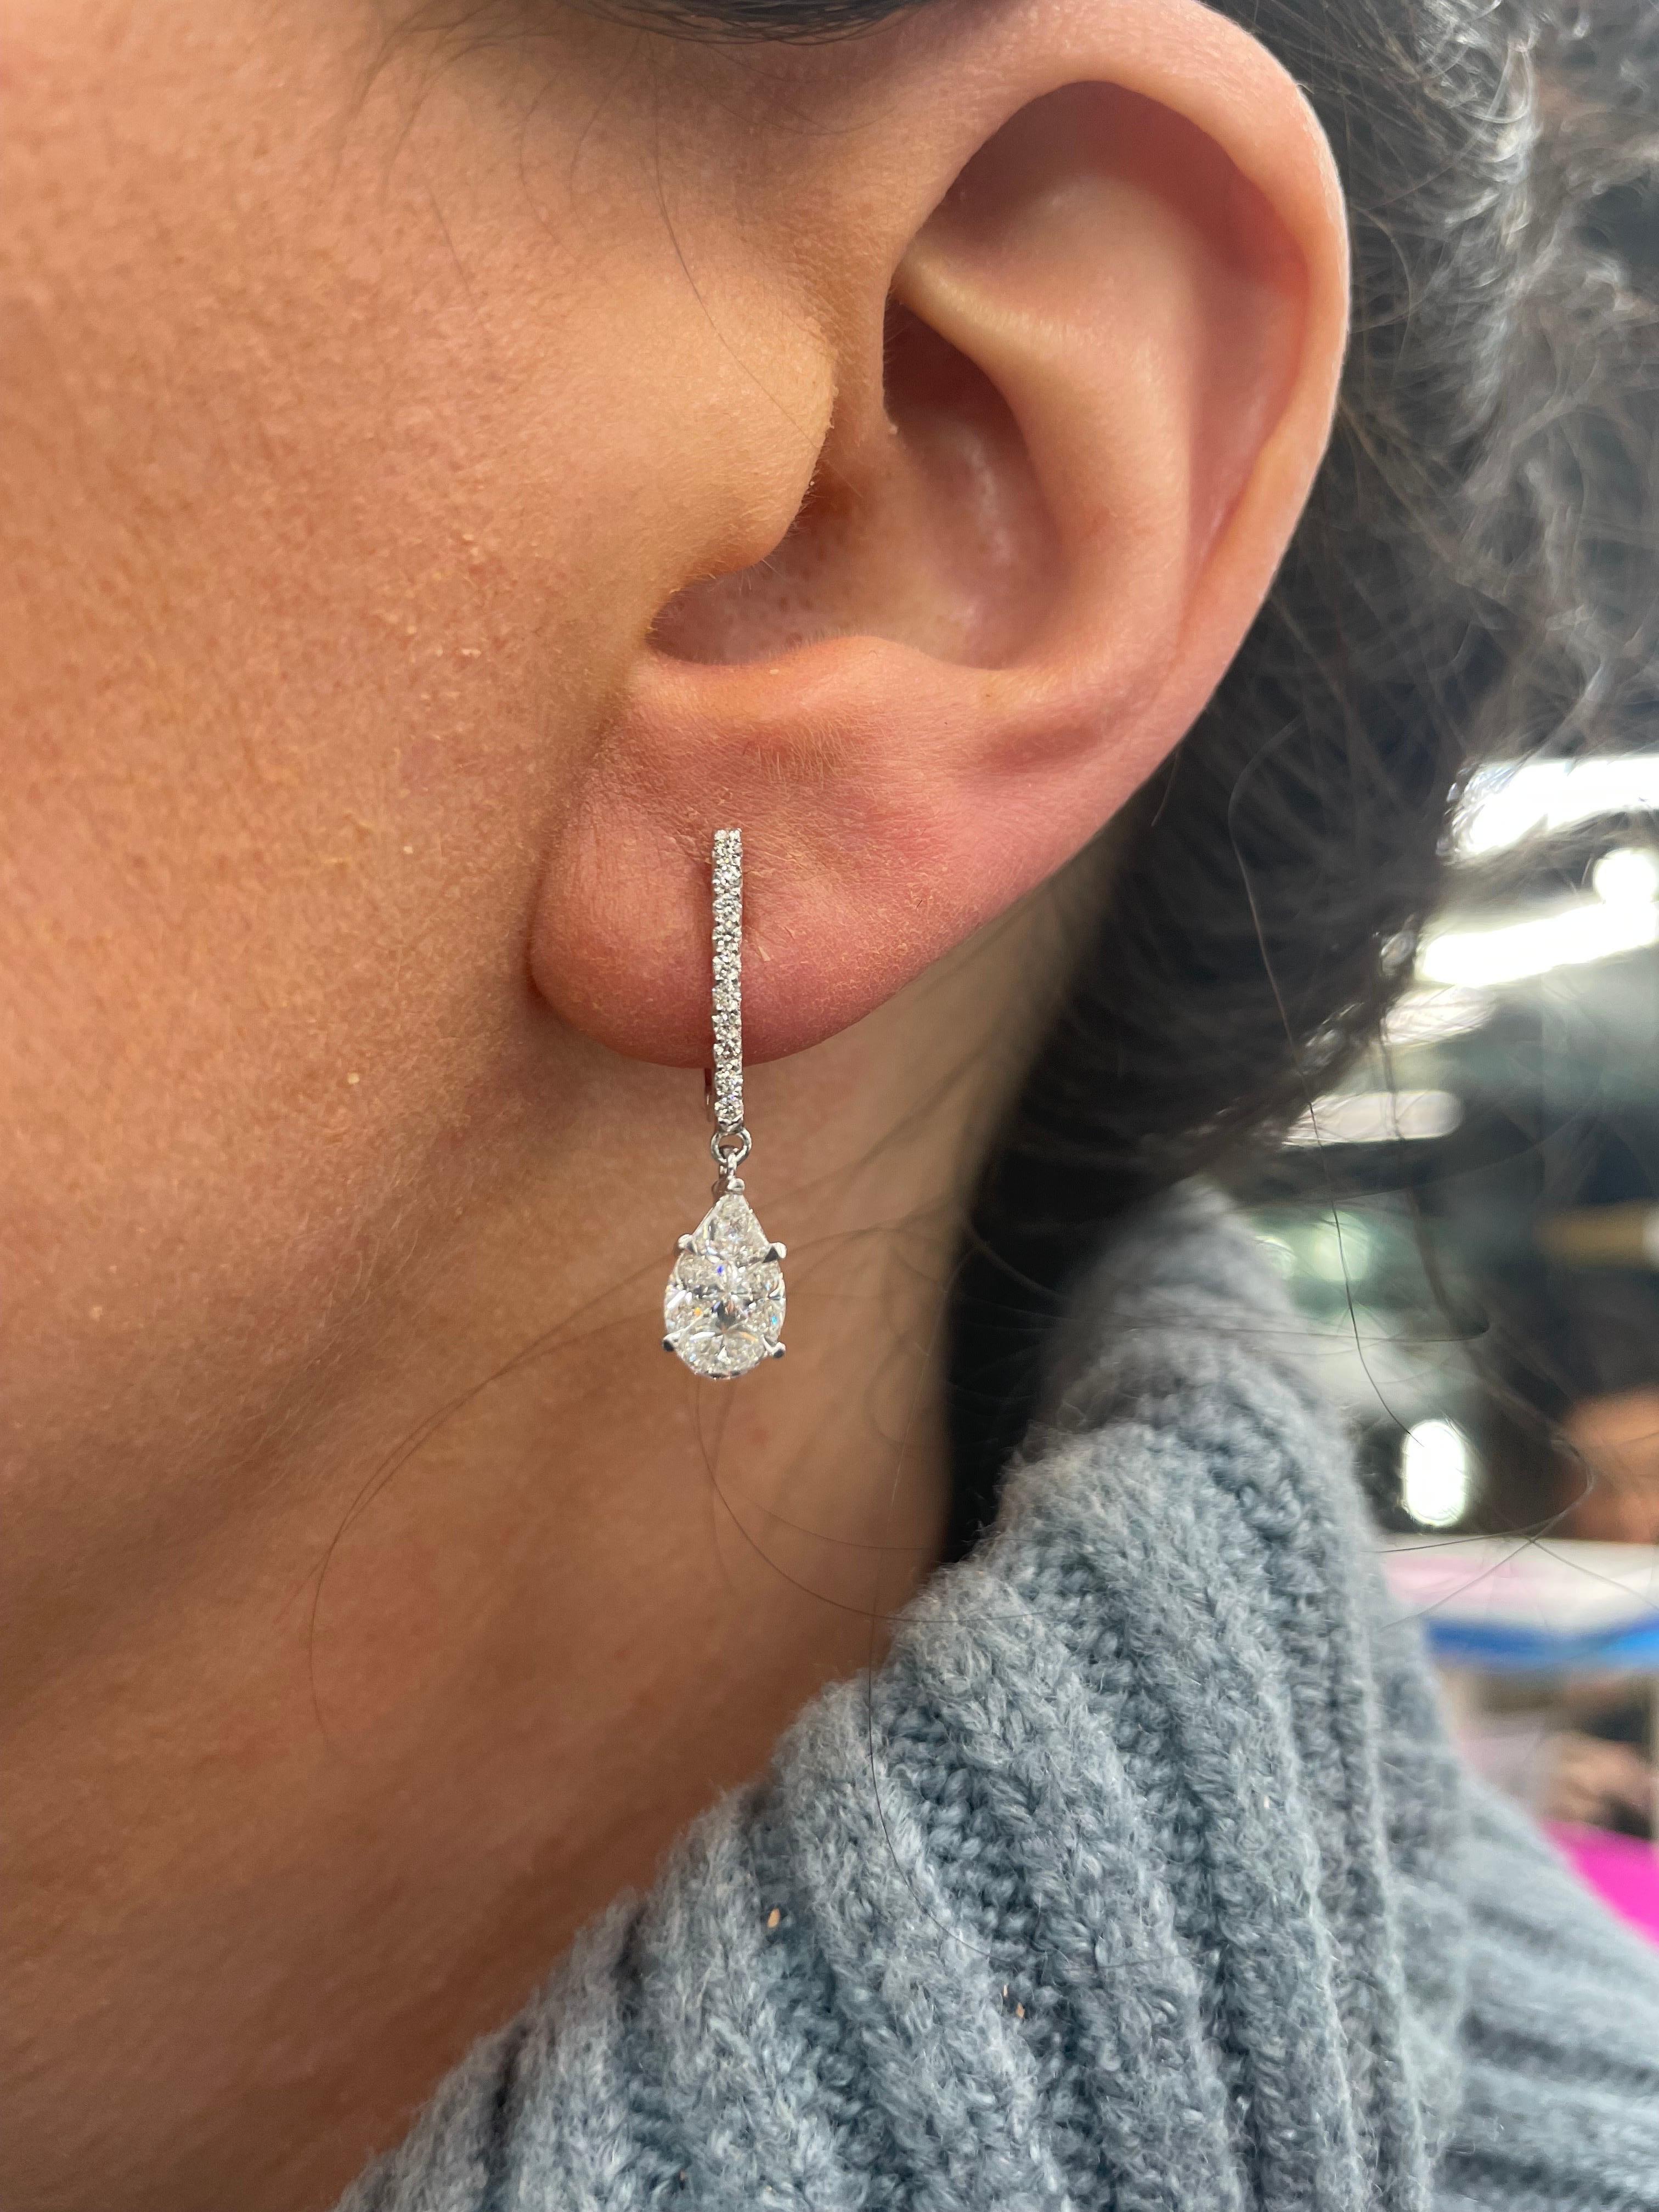 14 Karat White gold drop earrings featuring 20 round brilliants weighing 0.19 carats and 8 special cut diamonds to create a pear shape illusion weighing 1.21 carats. 
Color H
Clarity VS1-VS2